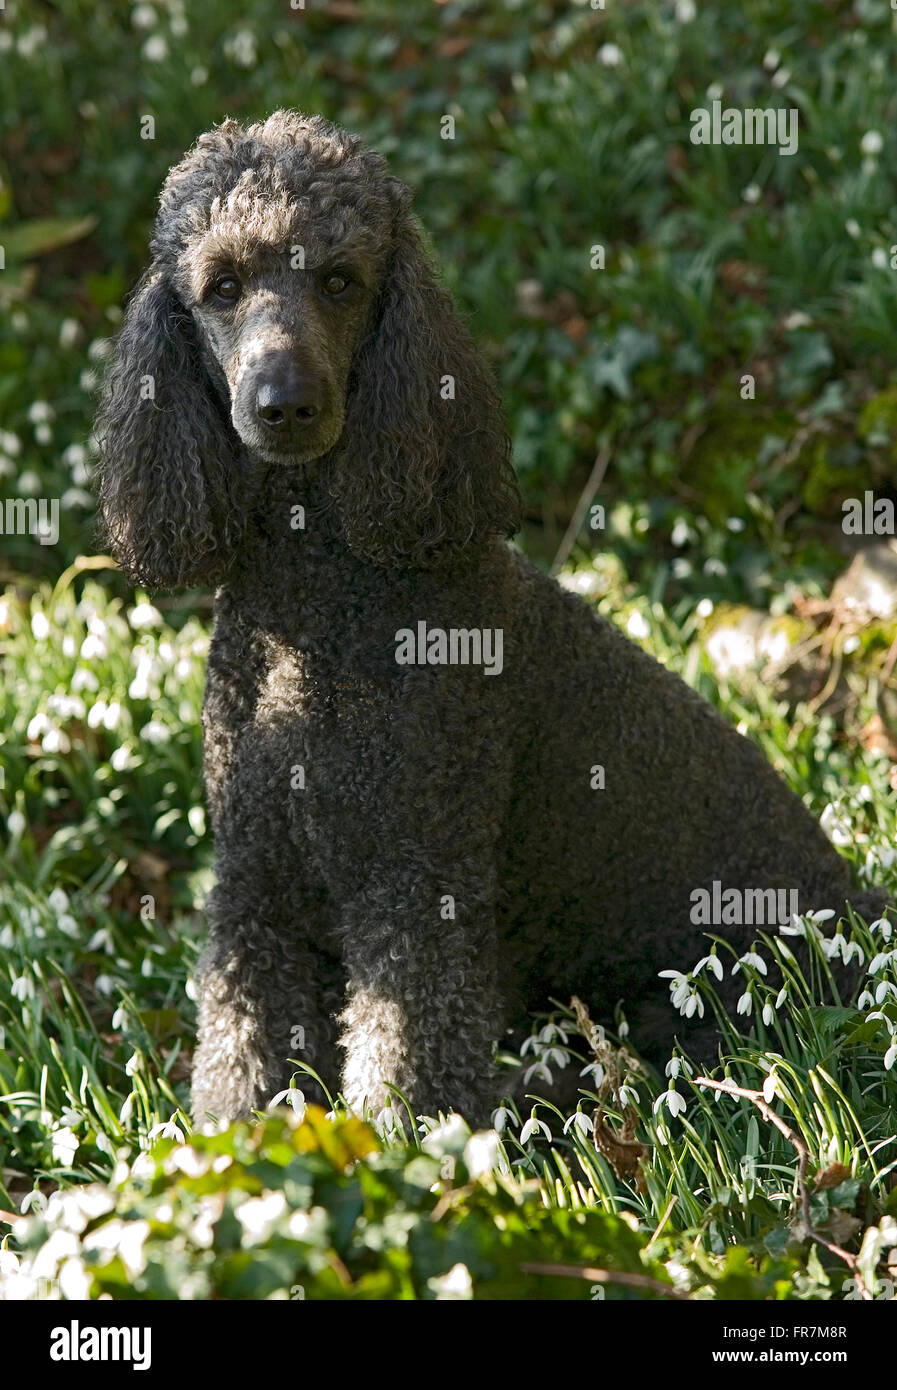 A black standard poodle sitting in snowdrops Stock Photo